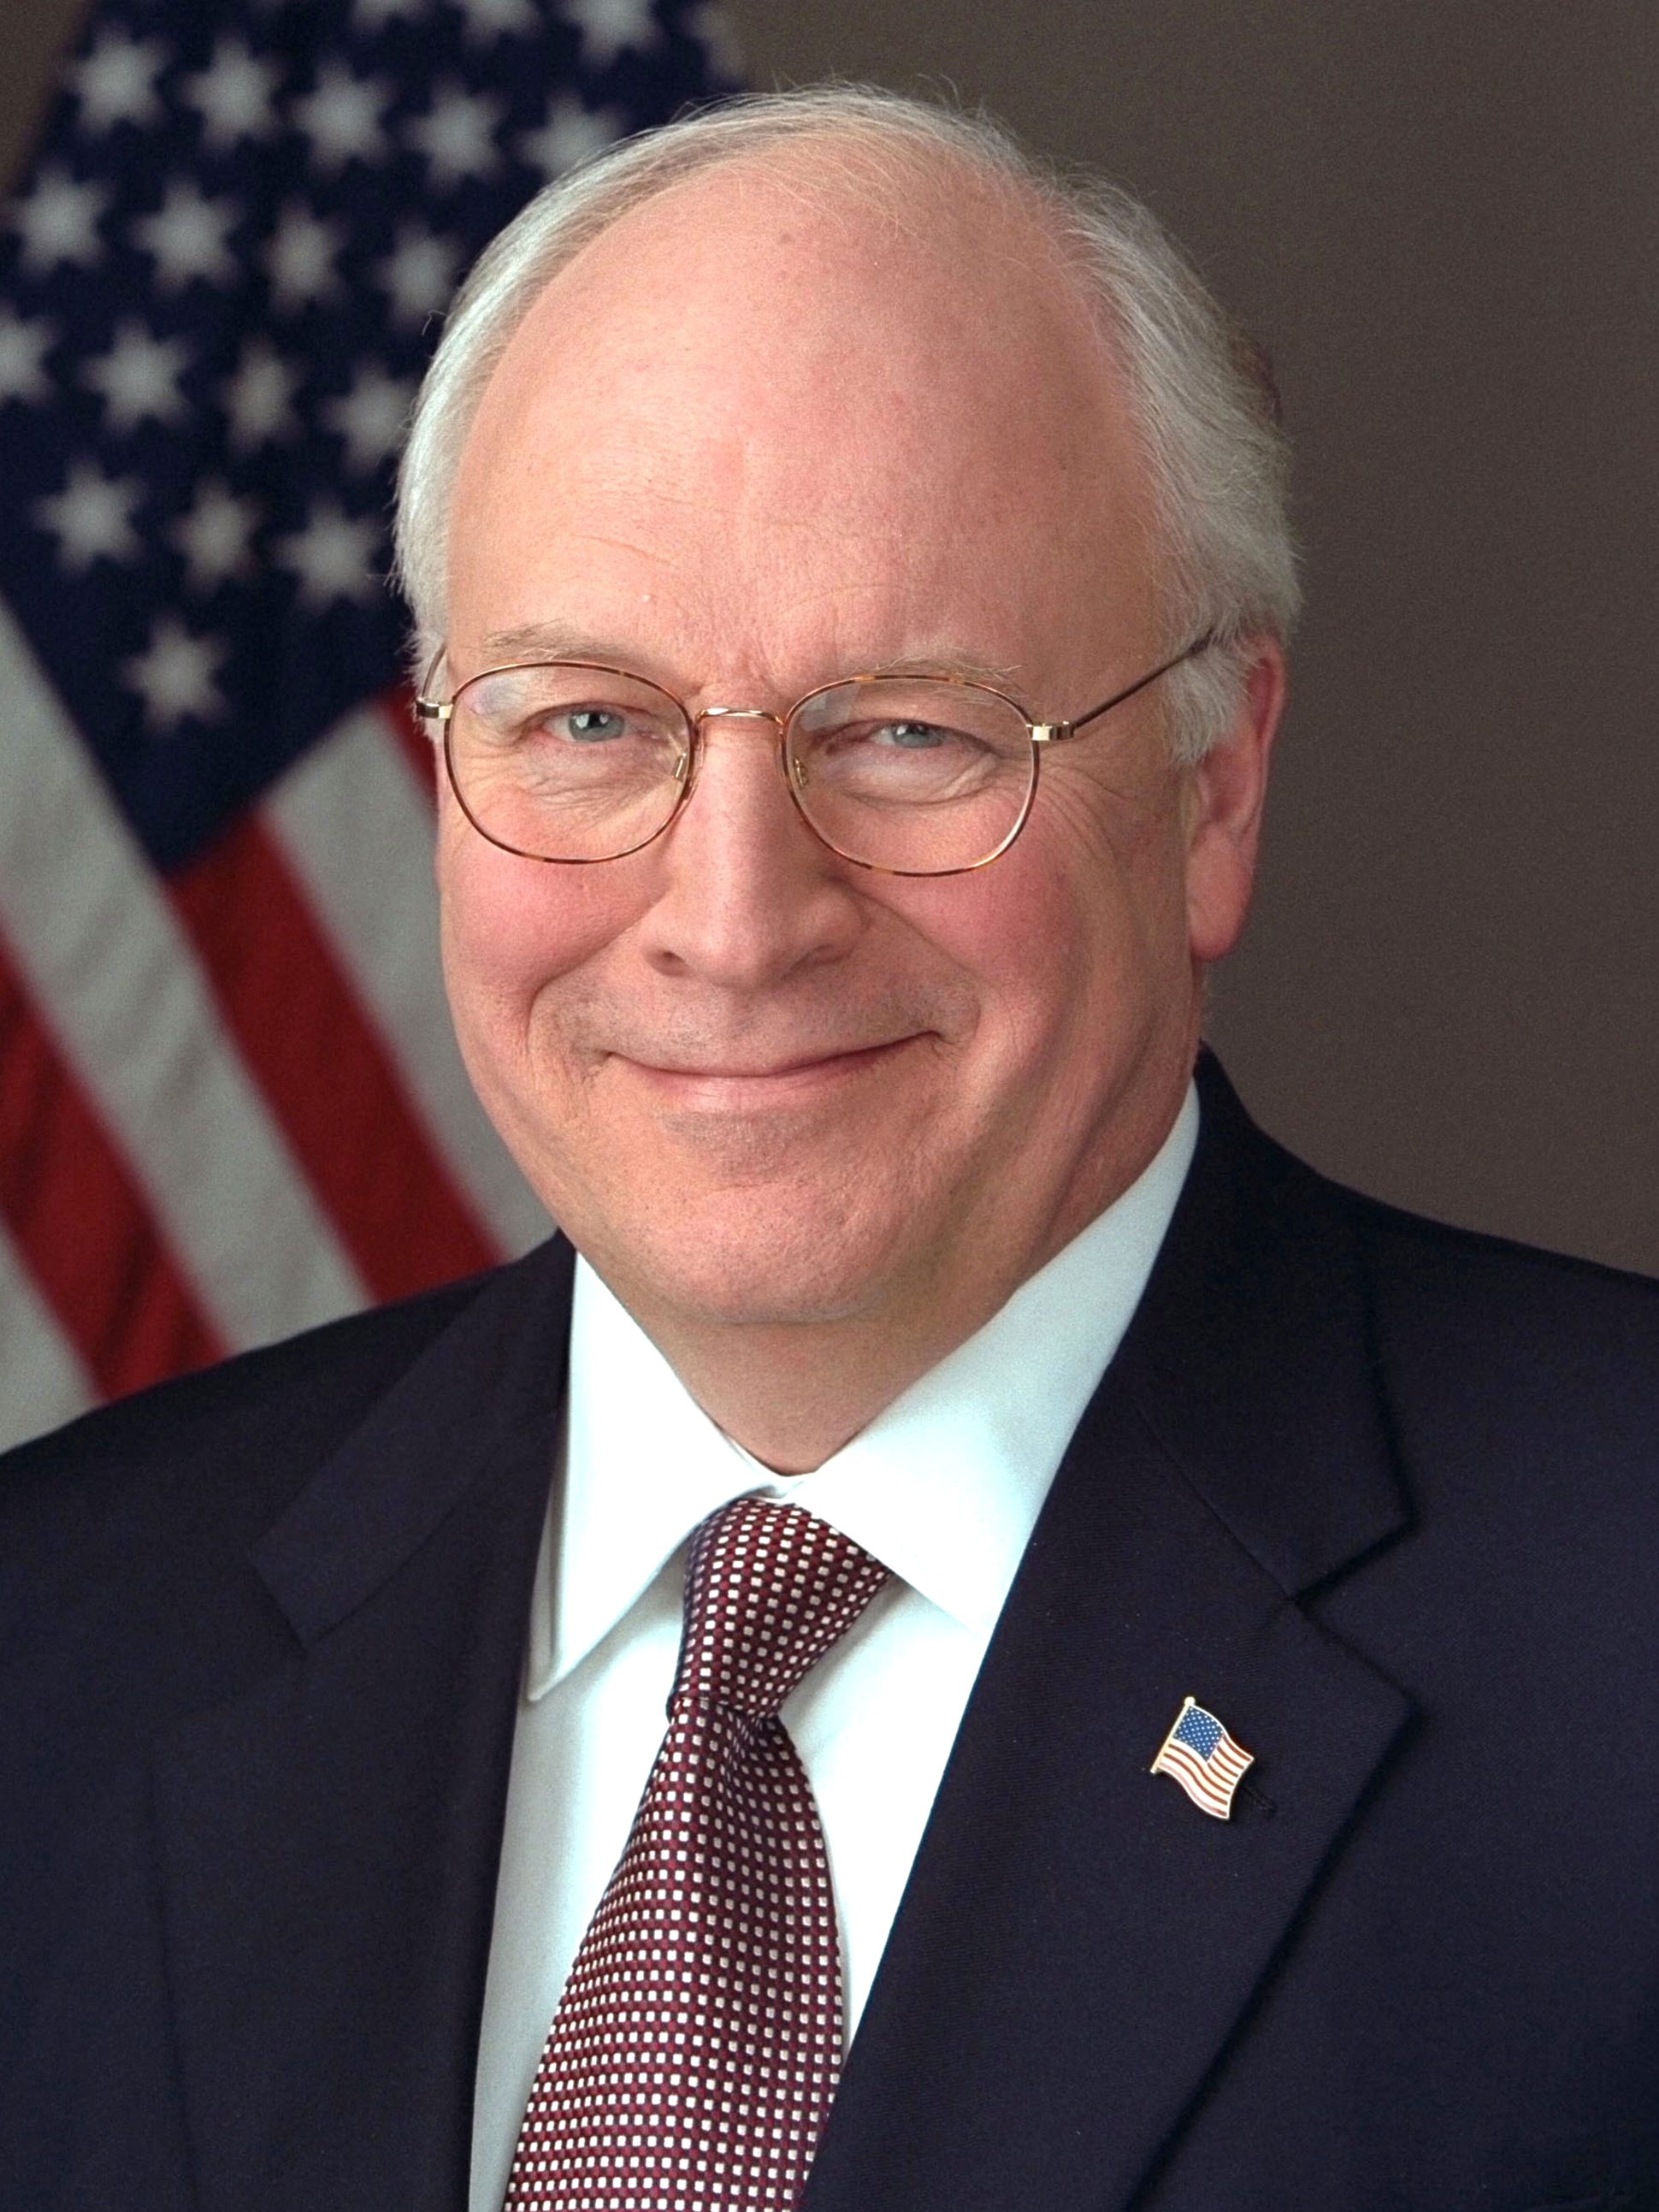 Dick pic cheney